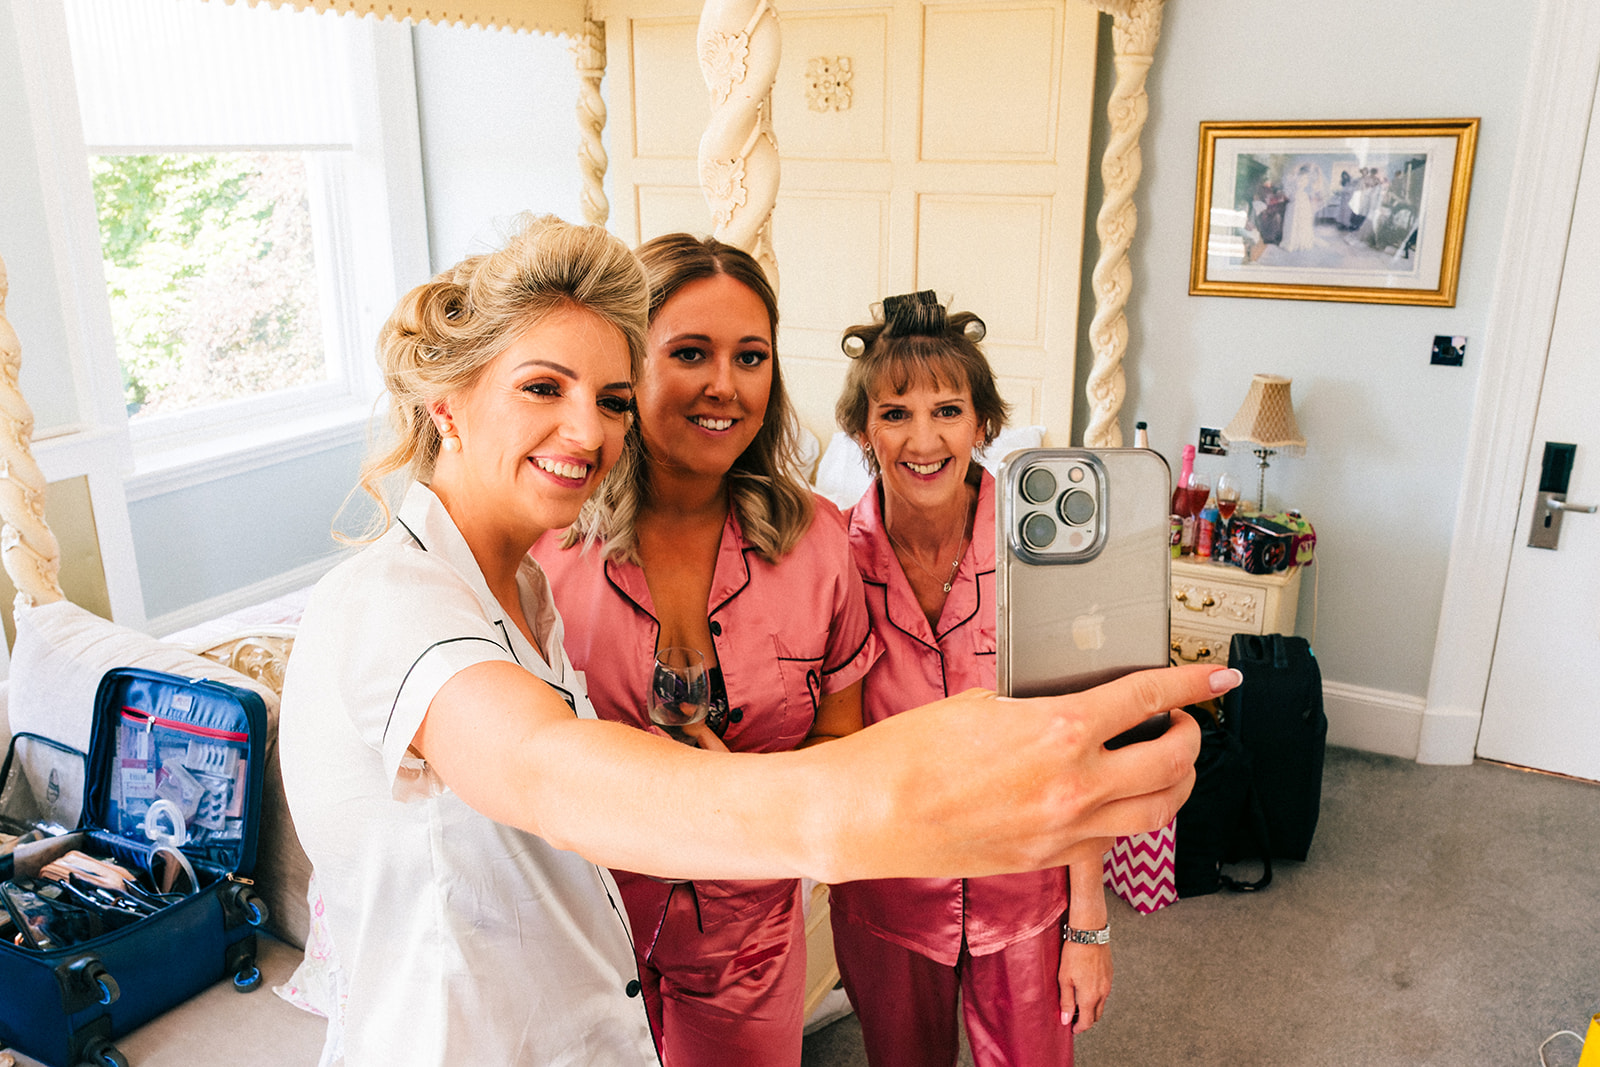 Shottle Hall Wedding Photography - the bride taking a selfie with her bridesmaid and her mum